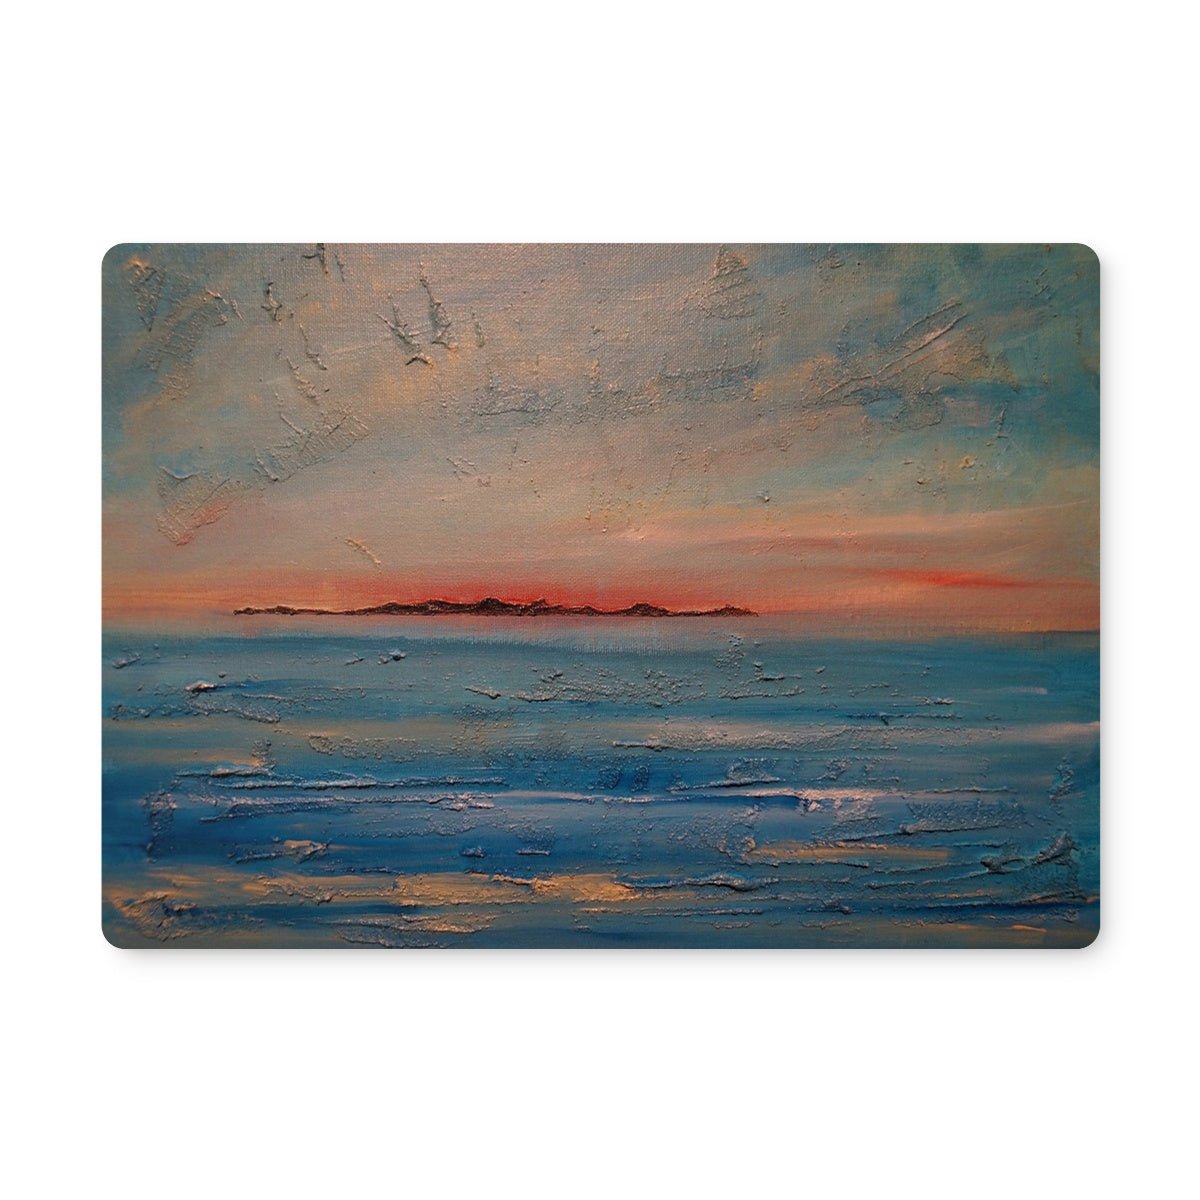 Gigha Sunset Art Gifts Placemat-Placemats-Hebridean Islands Art Gallery-2 Placemats-Paintings, Prints, Homeware, Art Gifts From Scotland By Scottish Artist Kevin Hunter